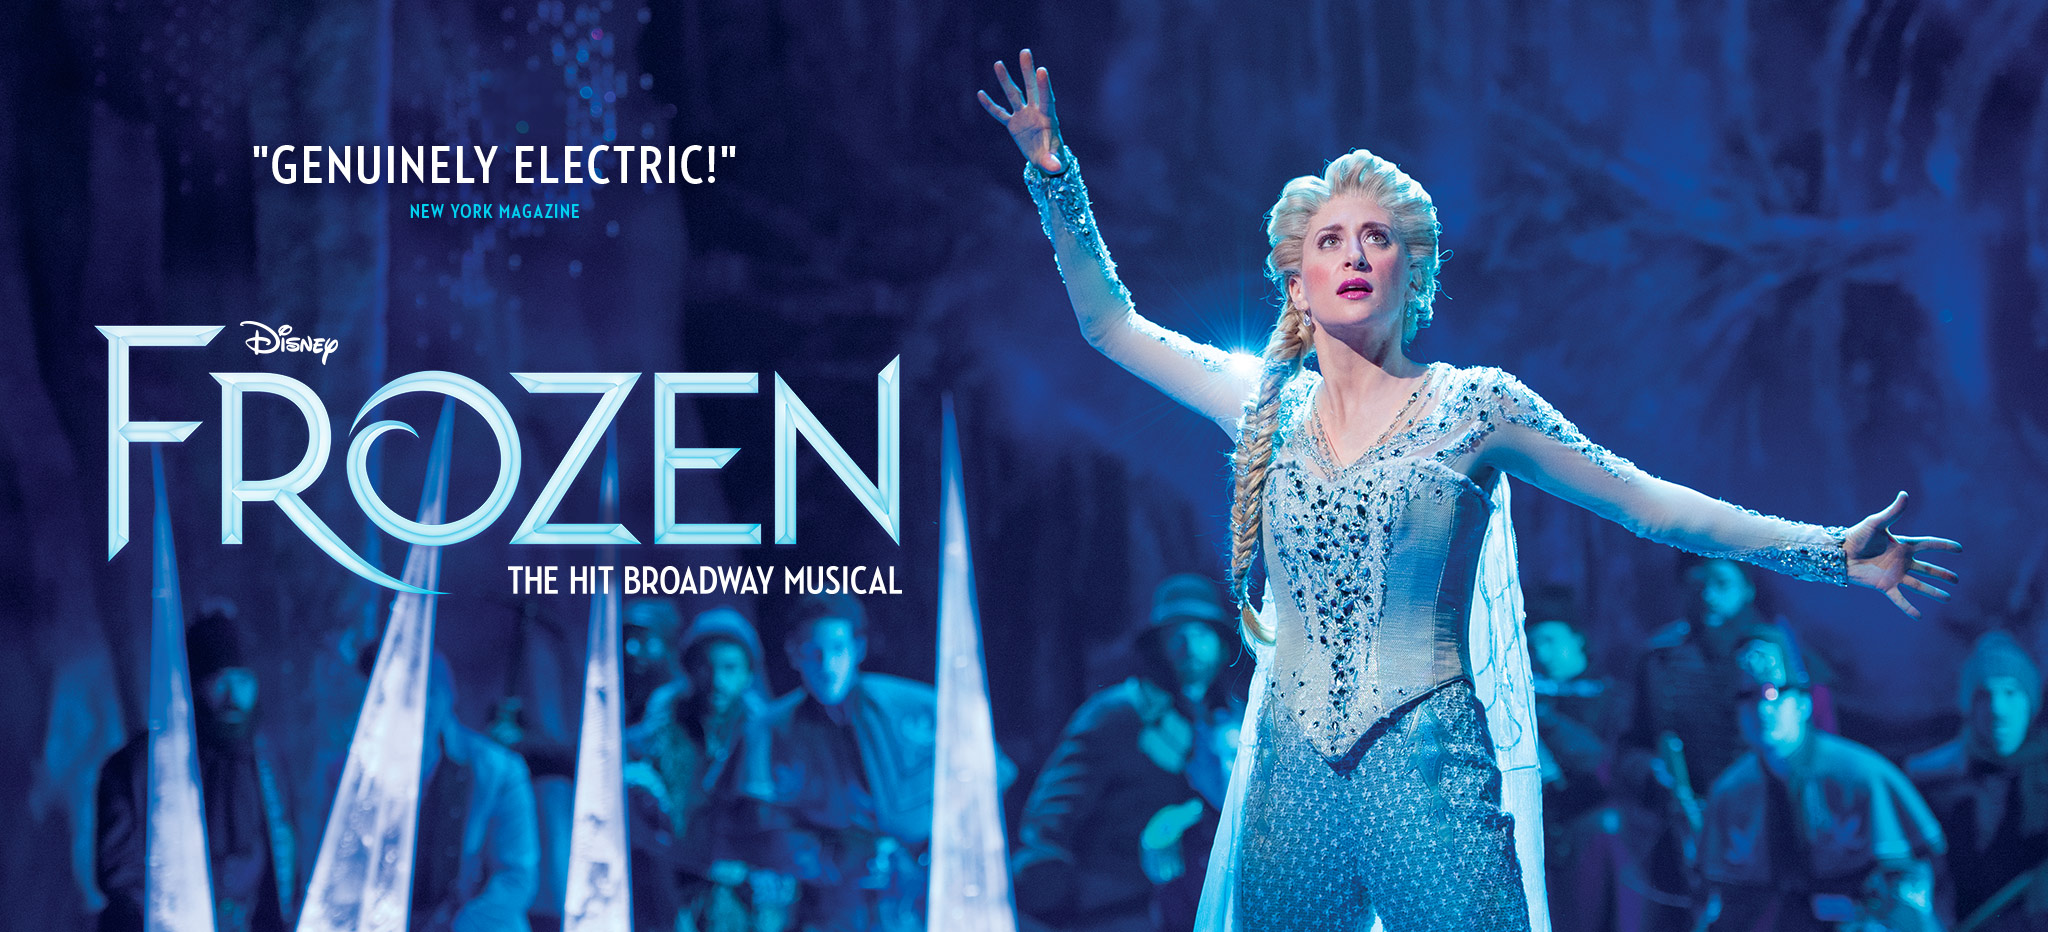 Disney’s Frozen the Musical now offering 25% off